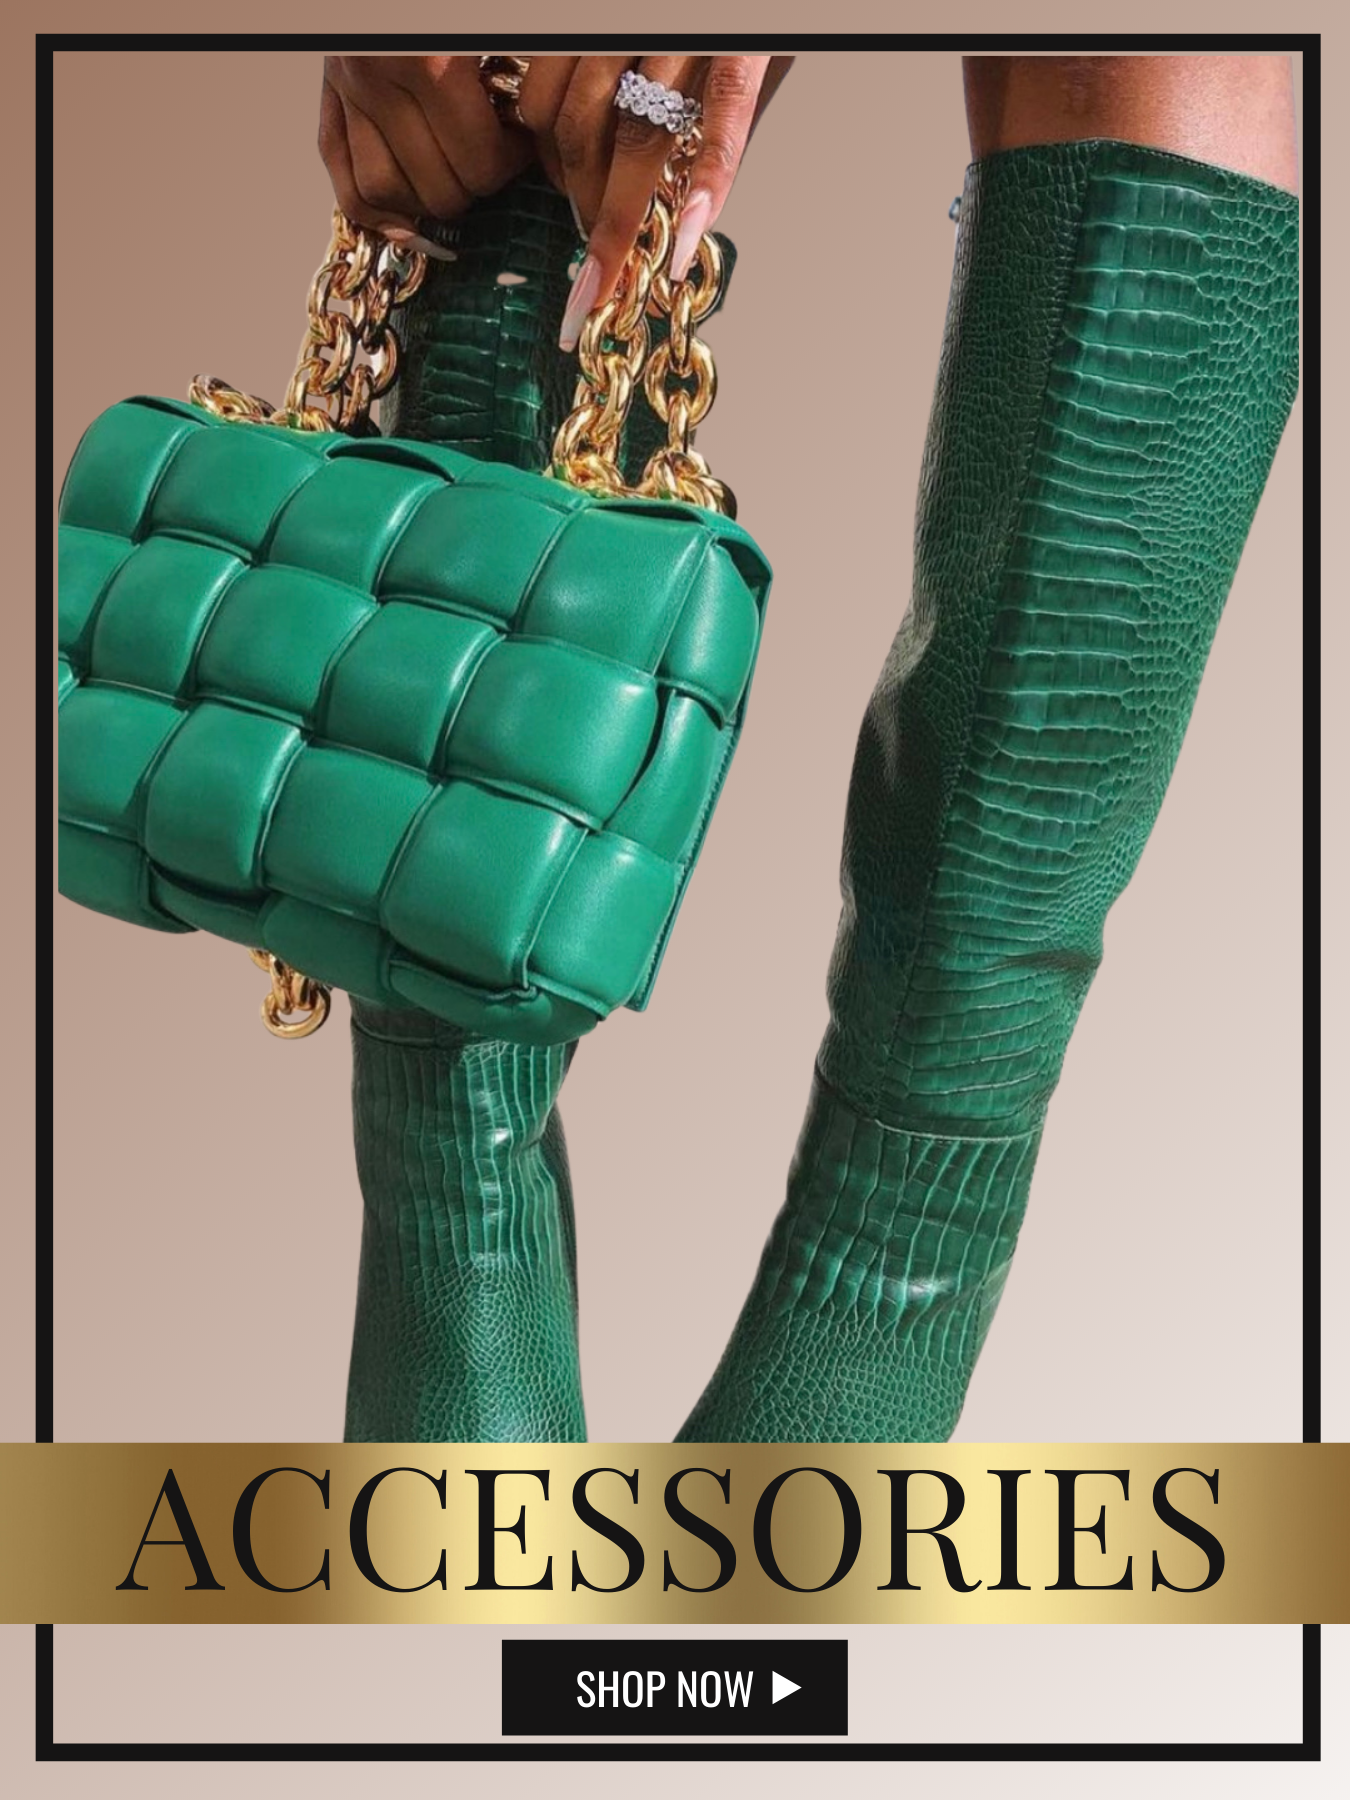 Bags & Accessories